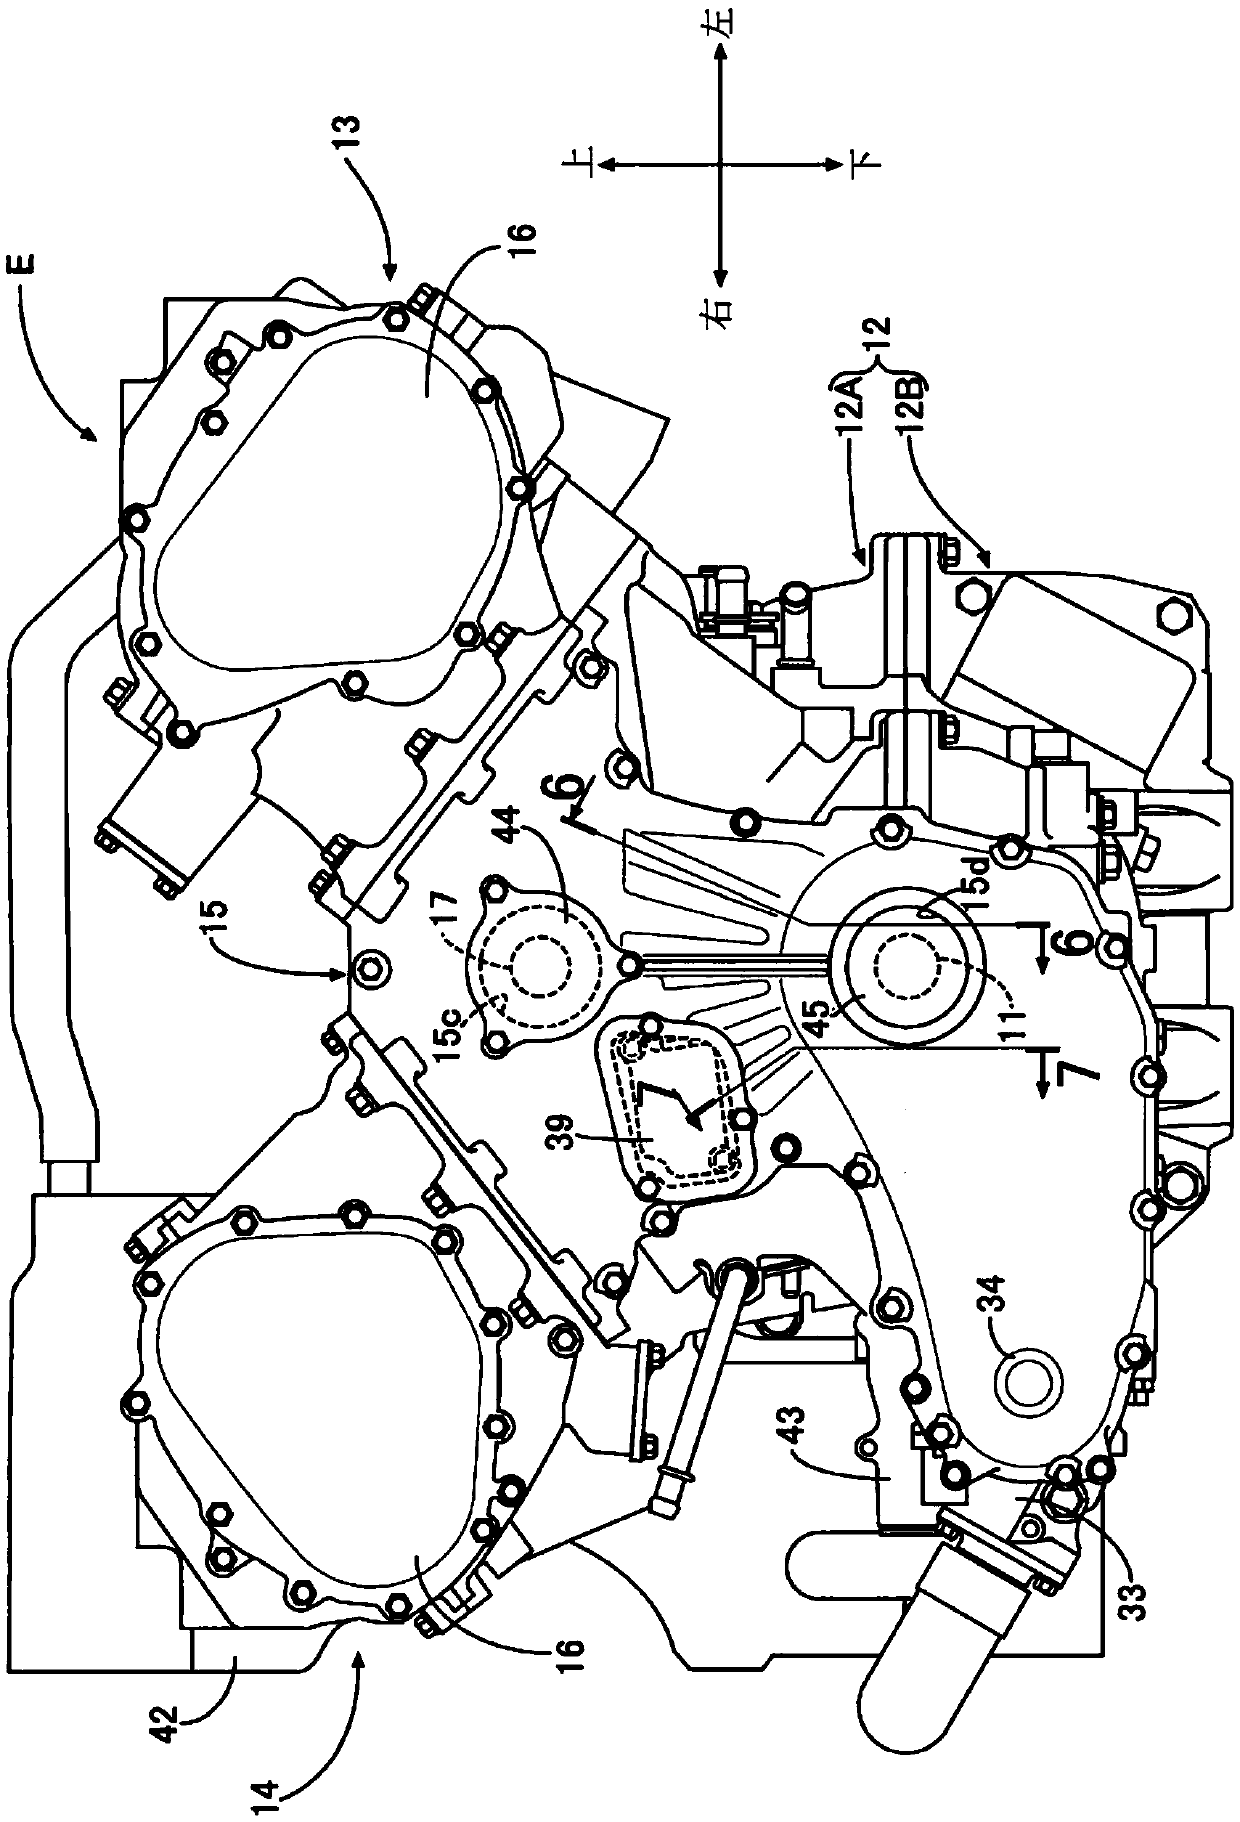 Cover parts for internal combustion engines